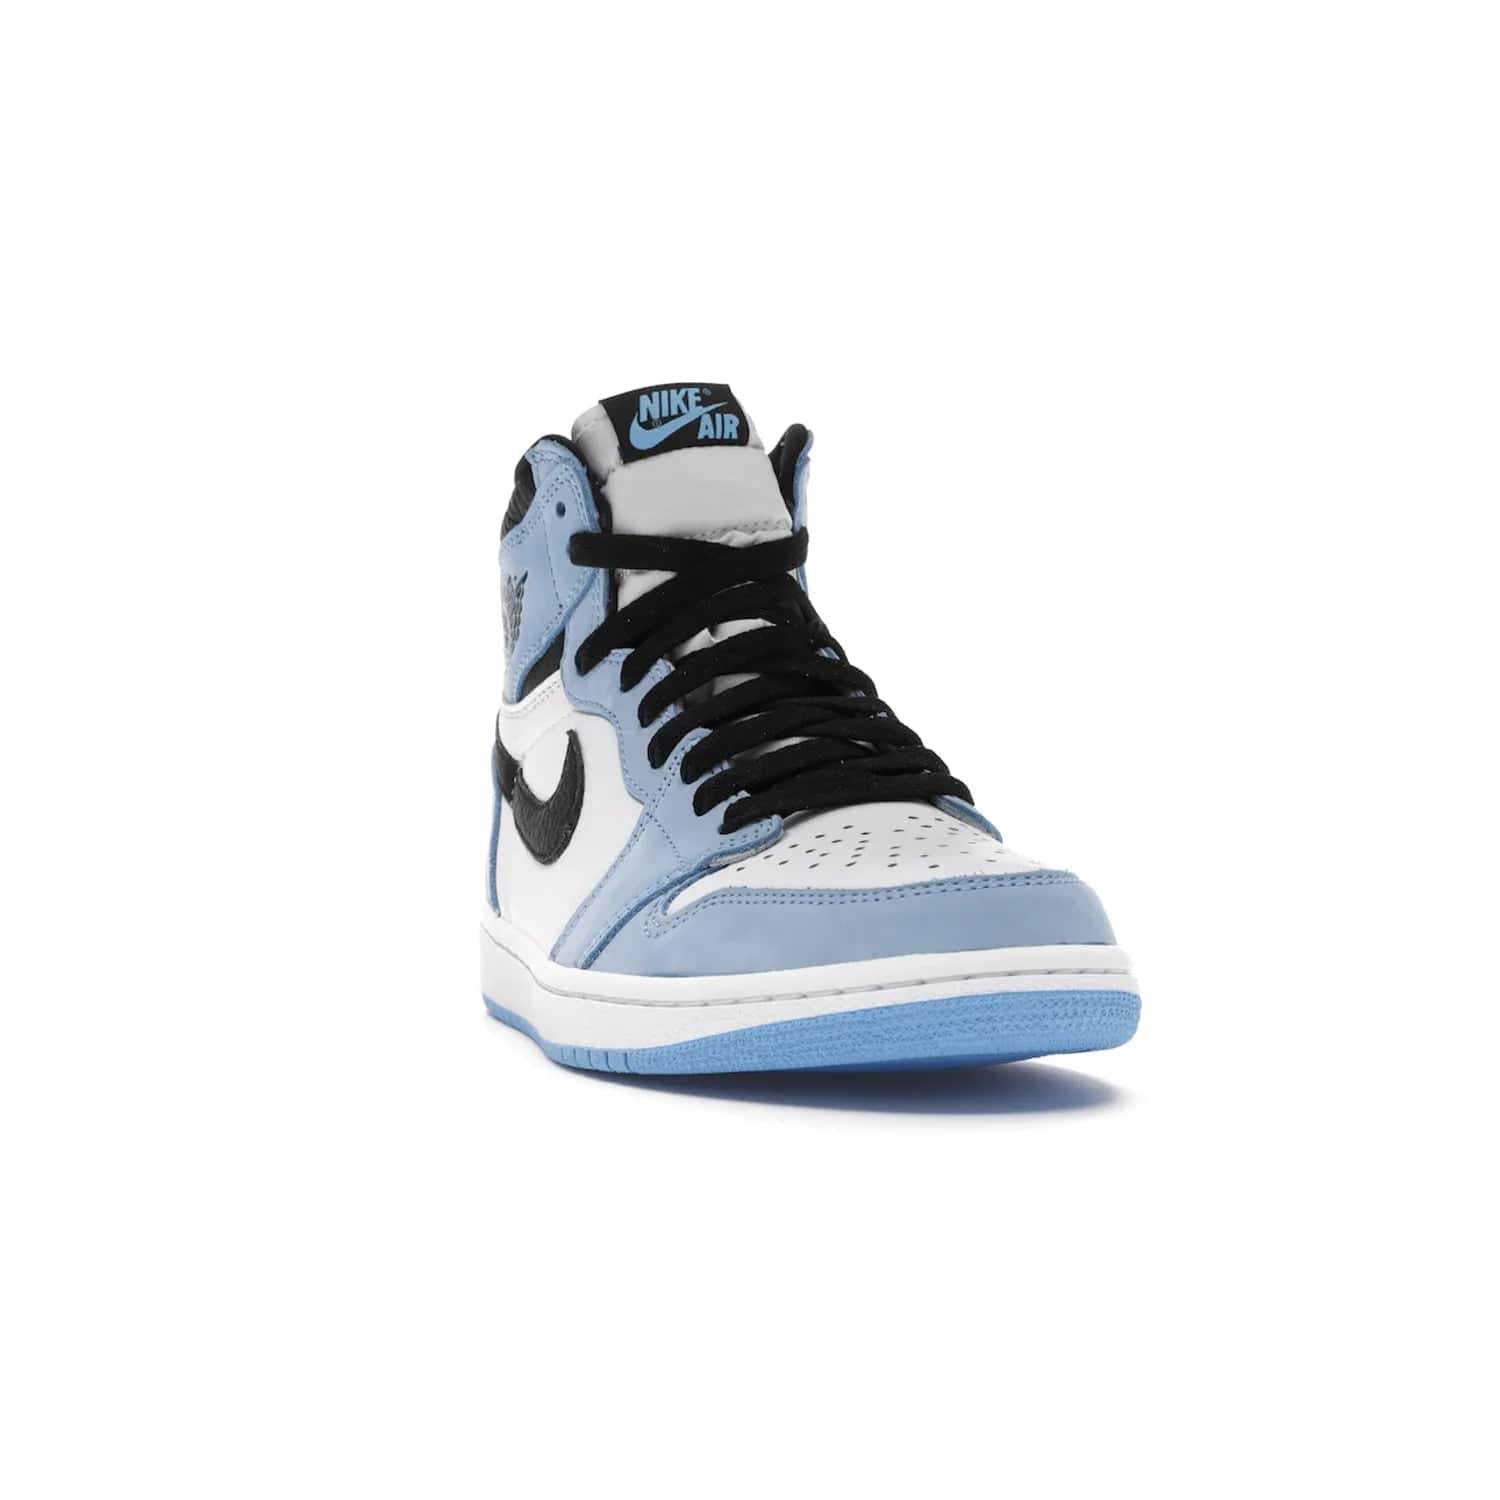 Jordan 1 Retro High White University Blue Black - Image 8 - Only at www.BallersClubKickz.com - Shop the Air Jordan 1 Retro High University Blue. White and black tumbled leather upper with University Blue Durabuck overlays, Nike Air woven label, Air Jordan Wings Logo, white midsole and University Blue outsole. Available March 2021.